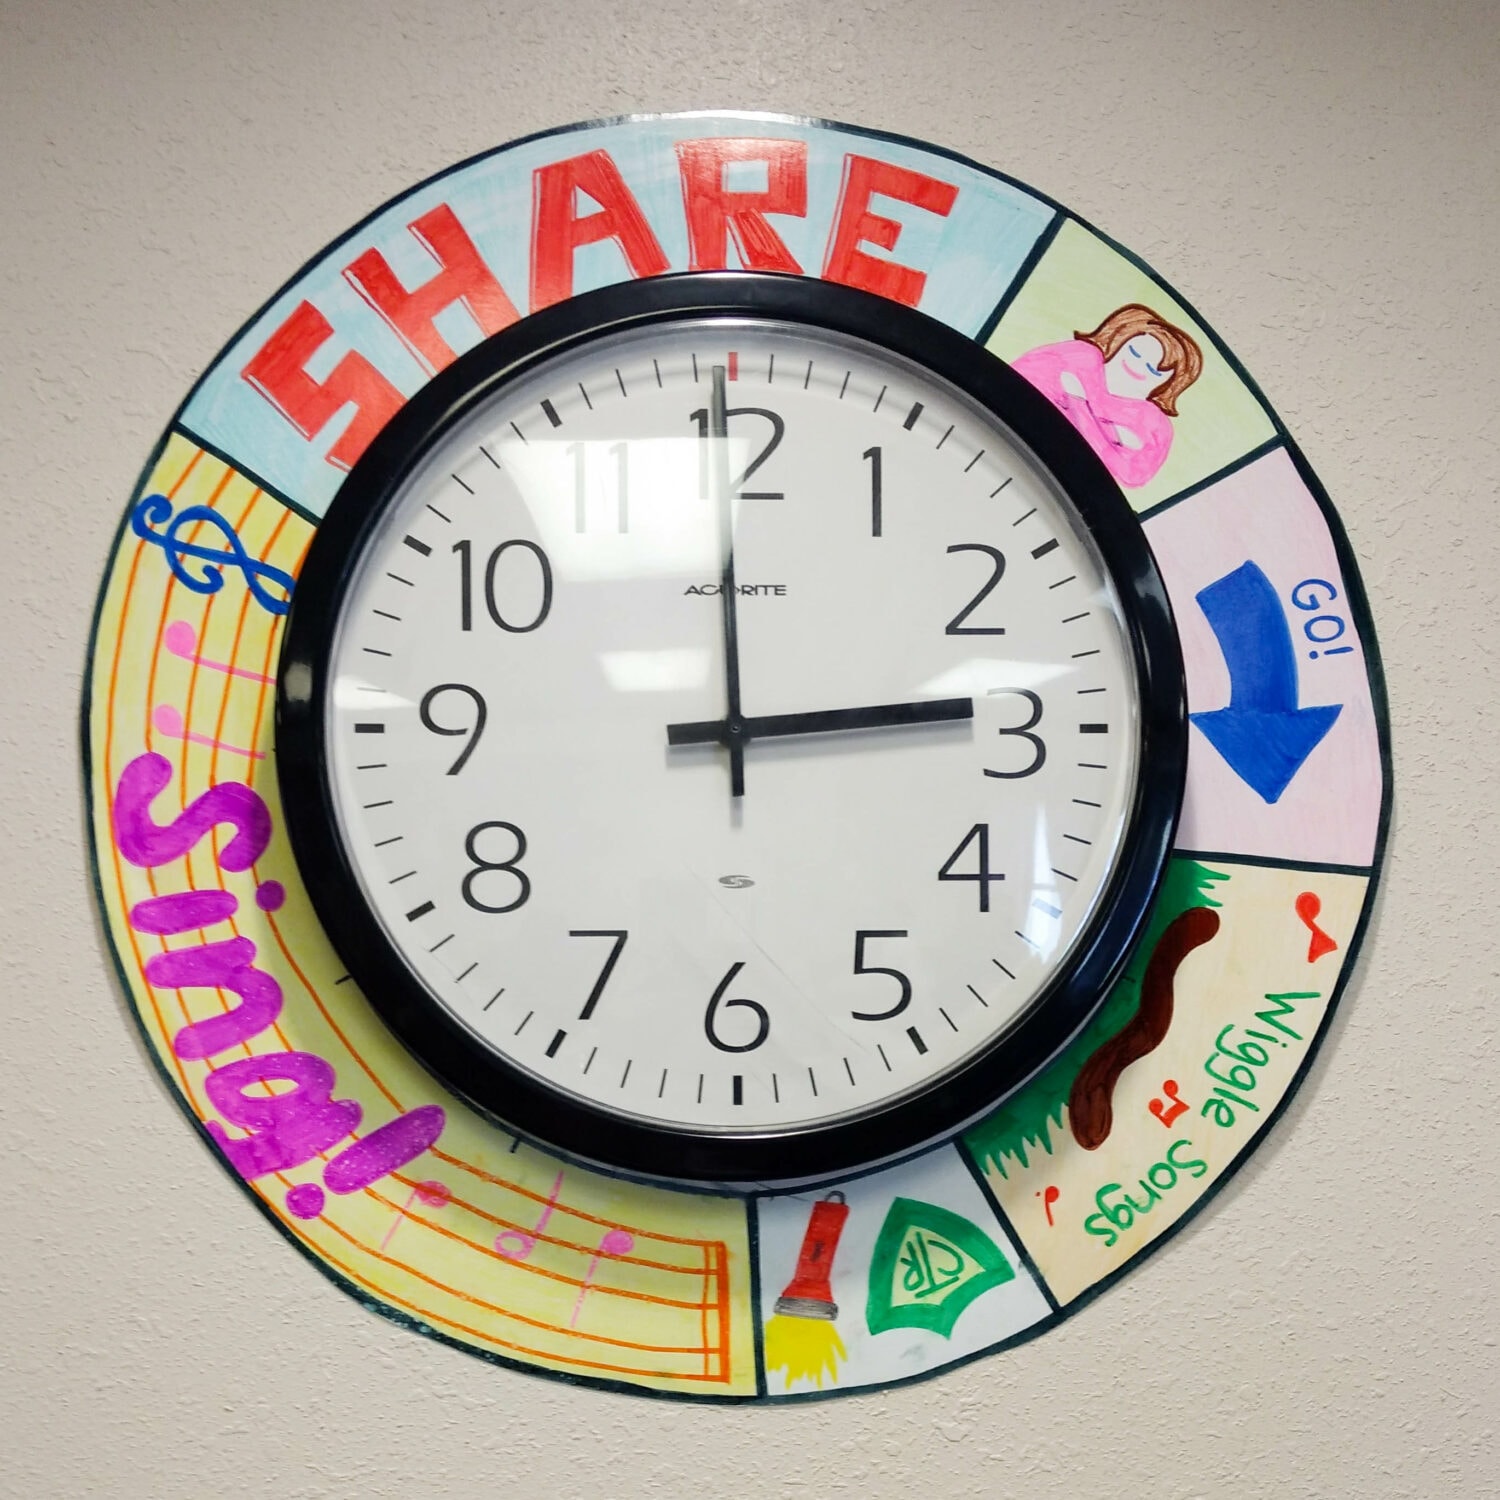 Primary Singing Time Clock Cover to easily see the schedule at a glance! Be on time and organized with this easy DIY idea for Primary Music Leaders and Presidencies!